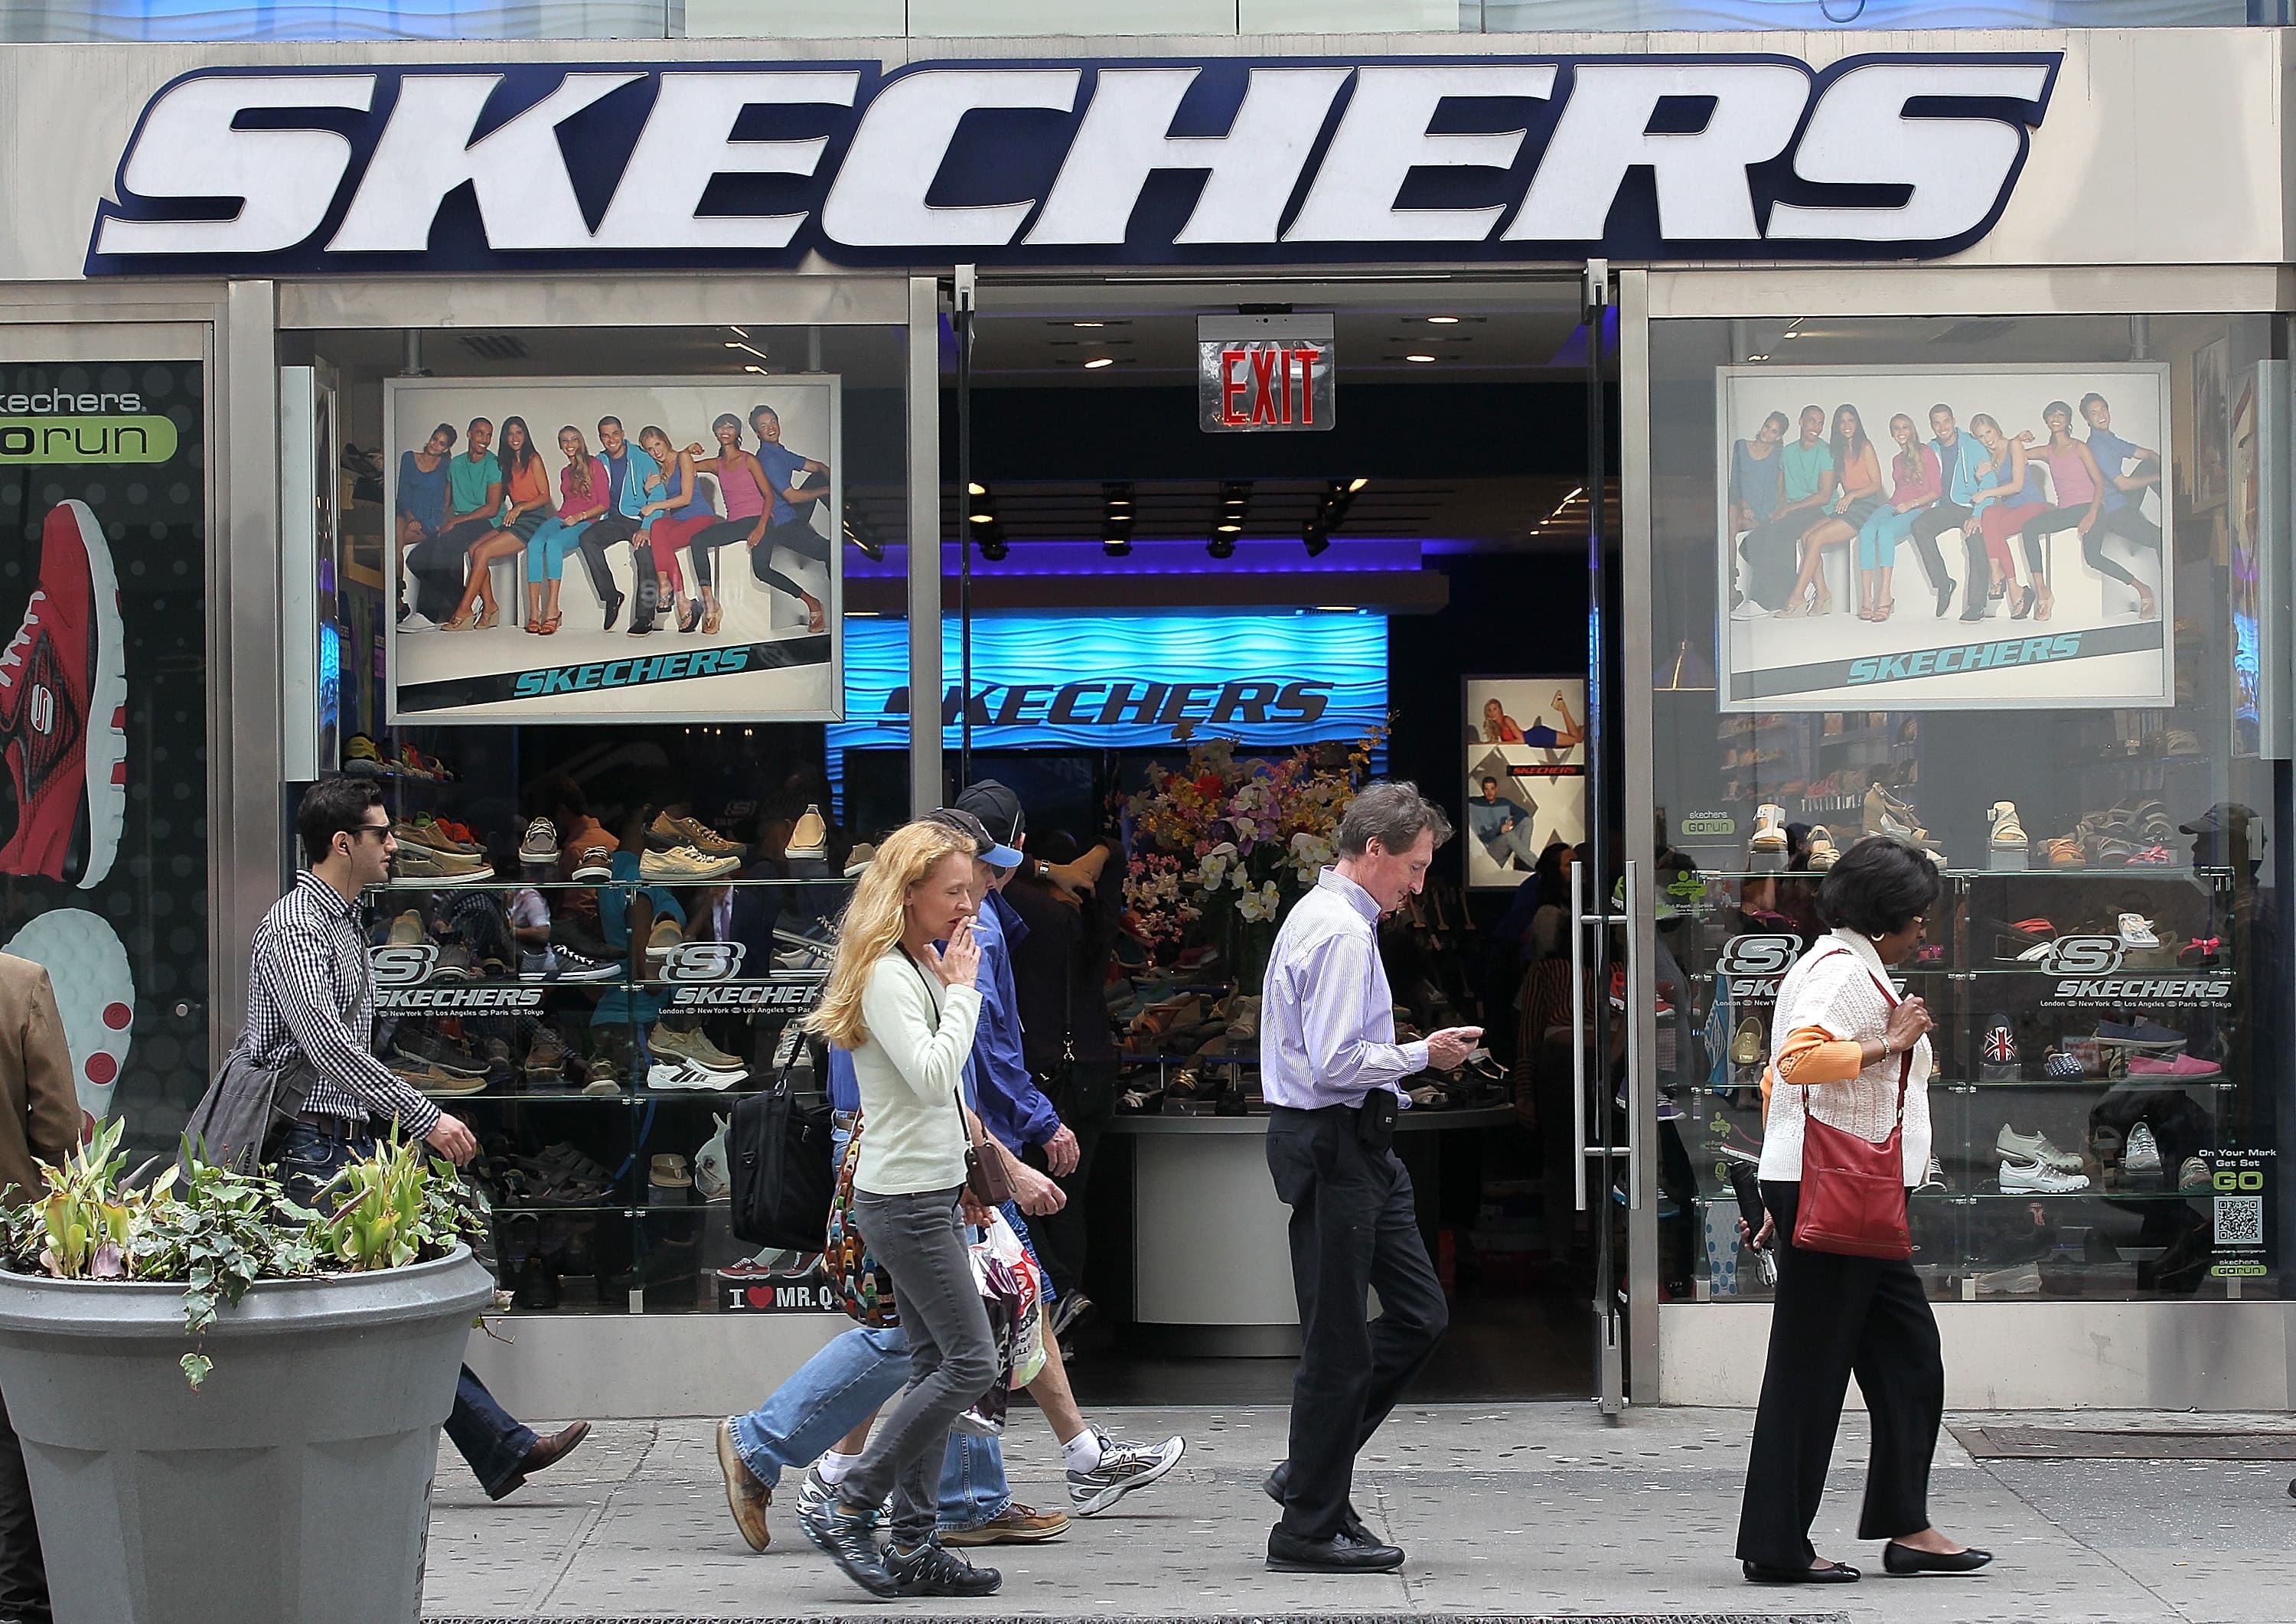 outlet skechers new york